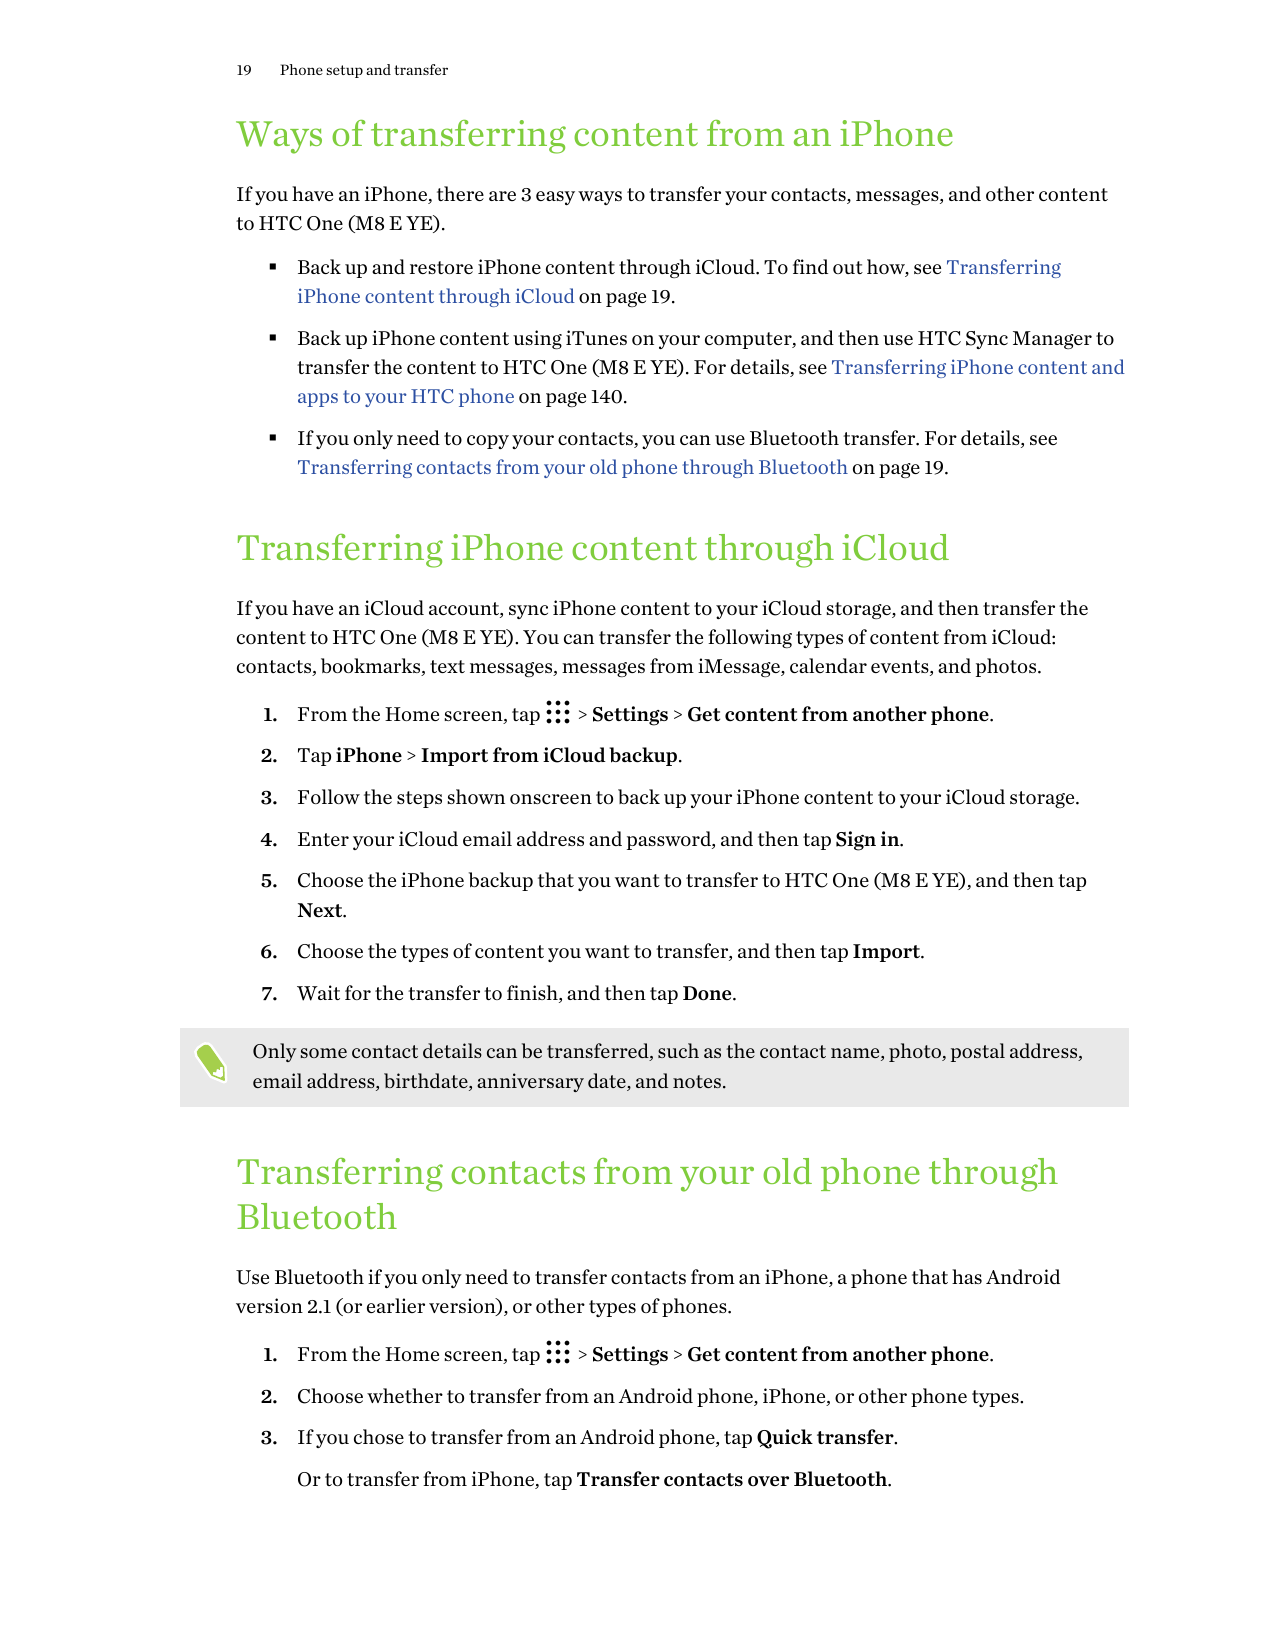 19Phone setup and transferWays of transferring content from an iPhoneIf you have an iPhone, there are 3 easy ways to transfer yo